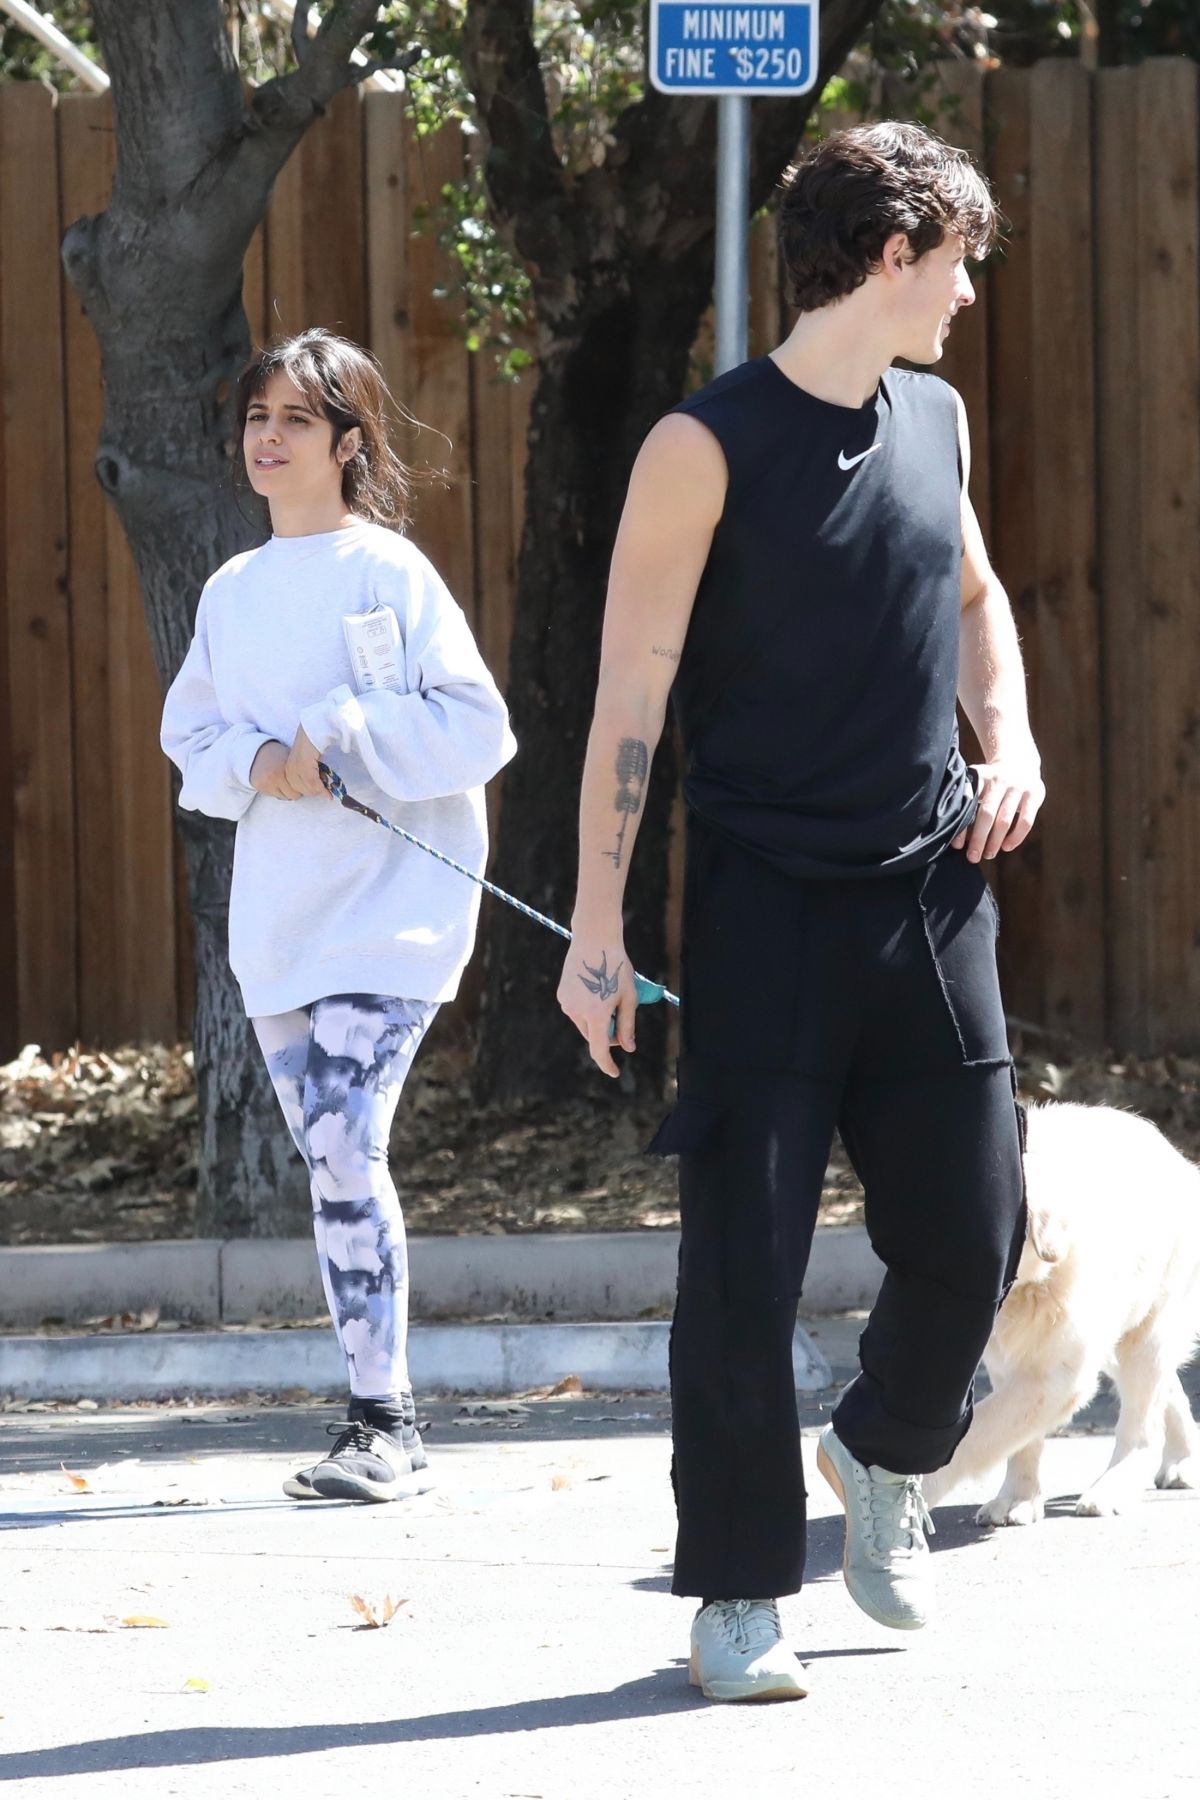 camila-cabello-and-shawn-mendes-out-with-their-dog-in-los-angeles-03-19-2021-1.jpg